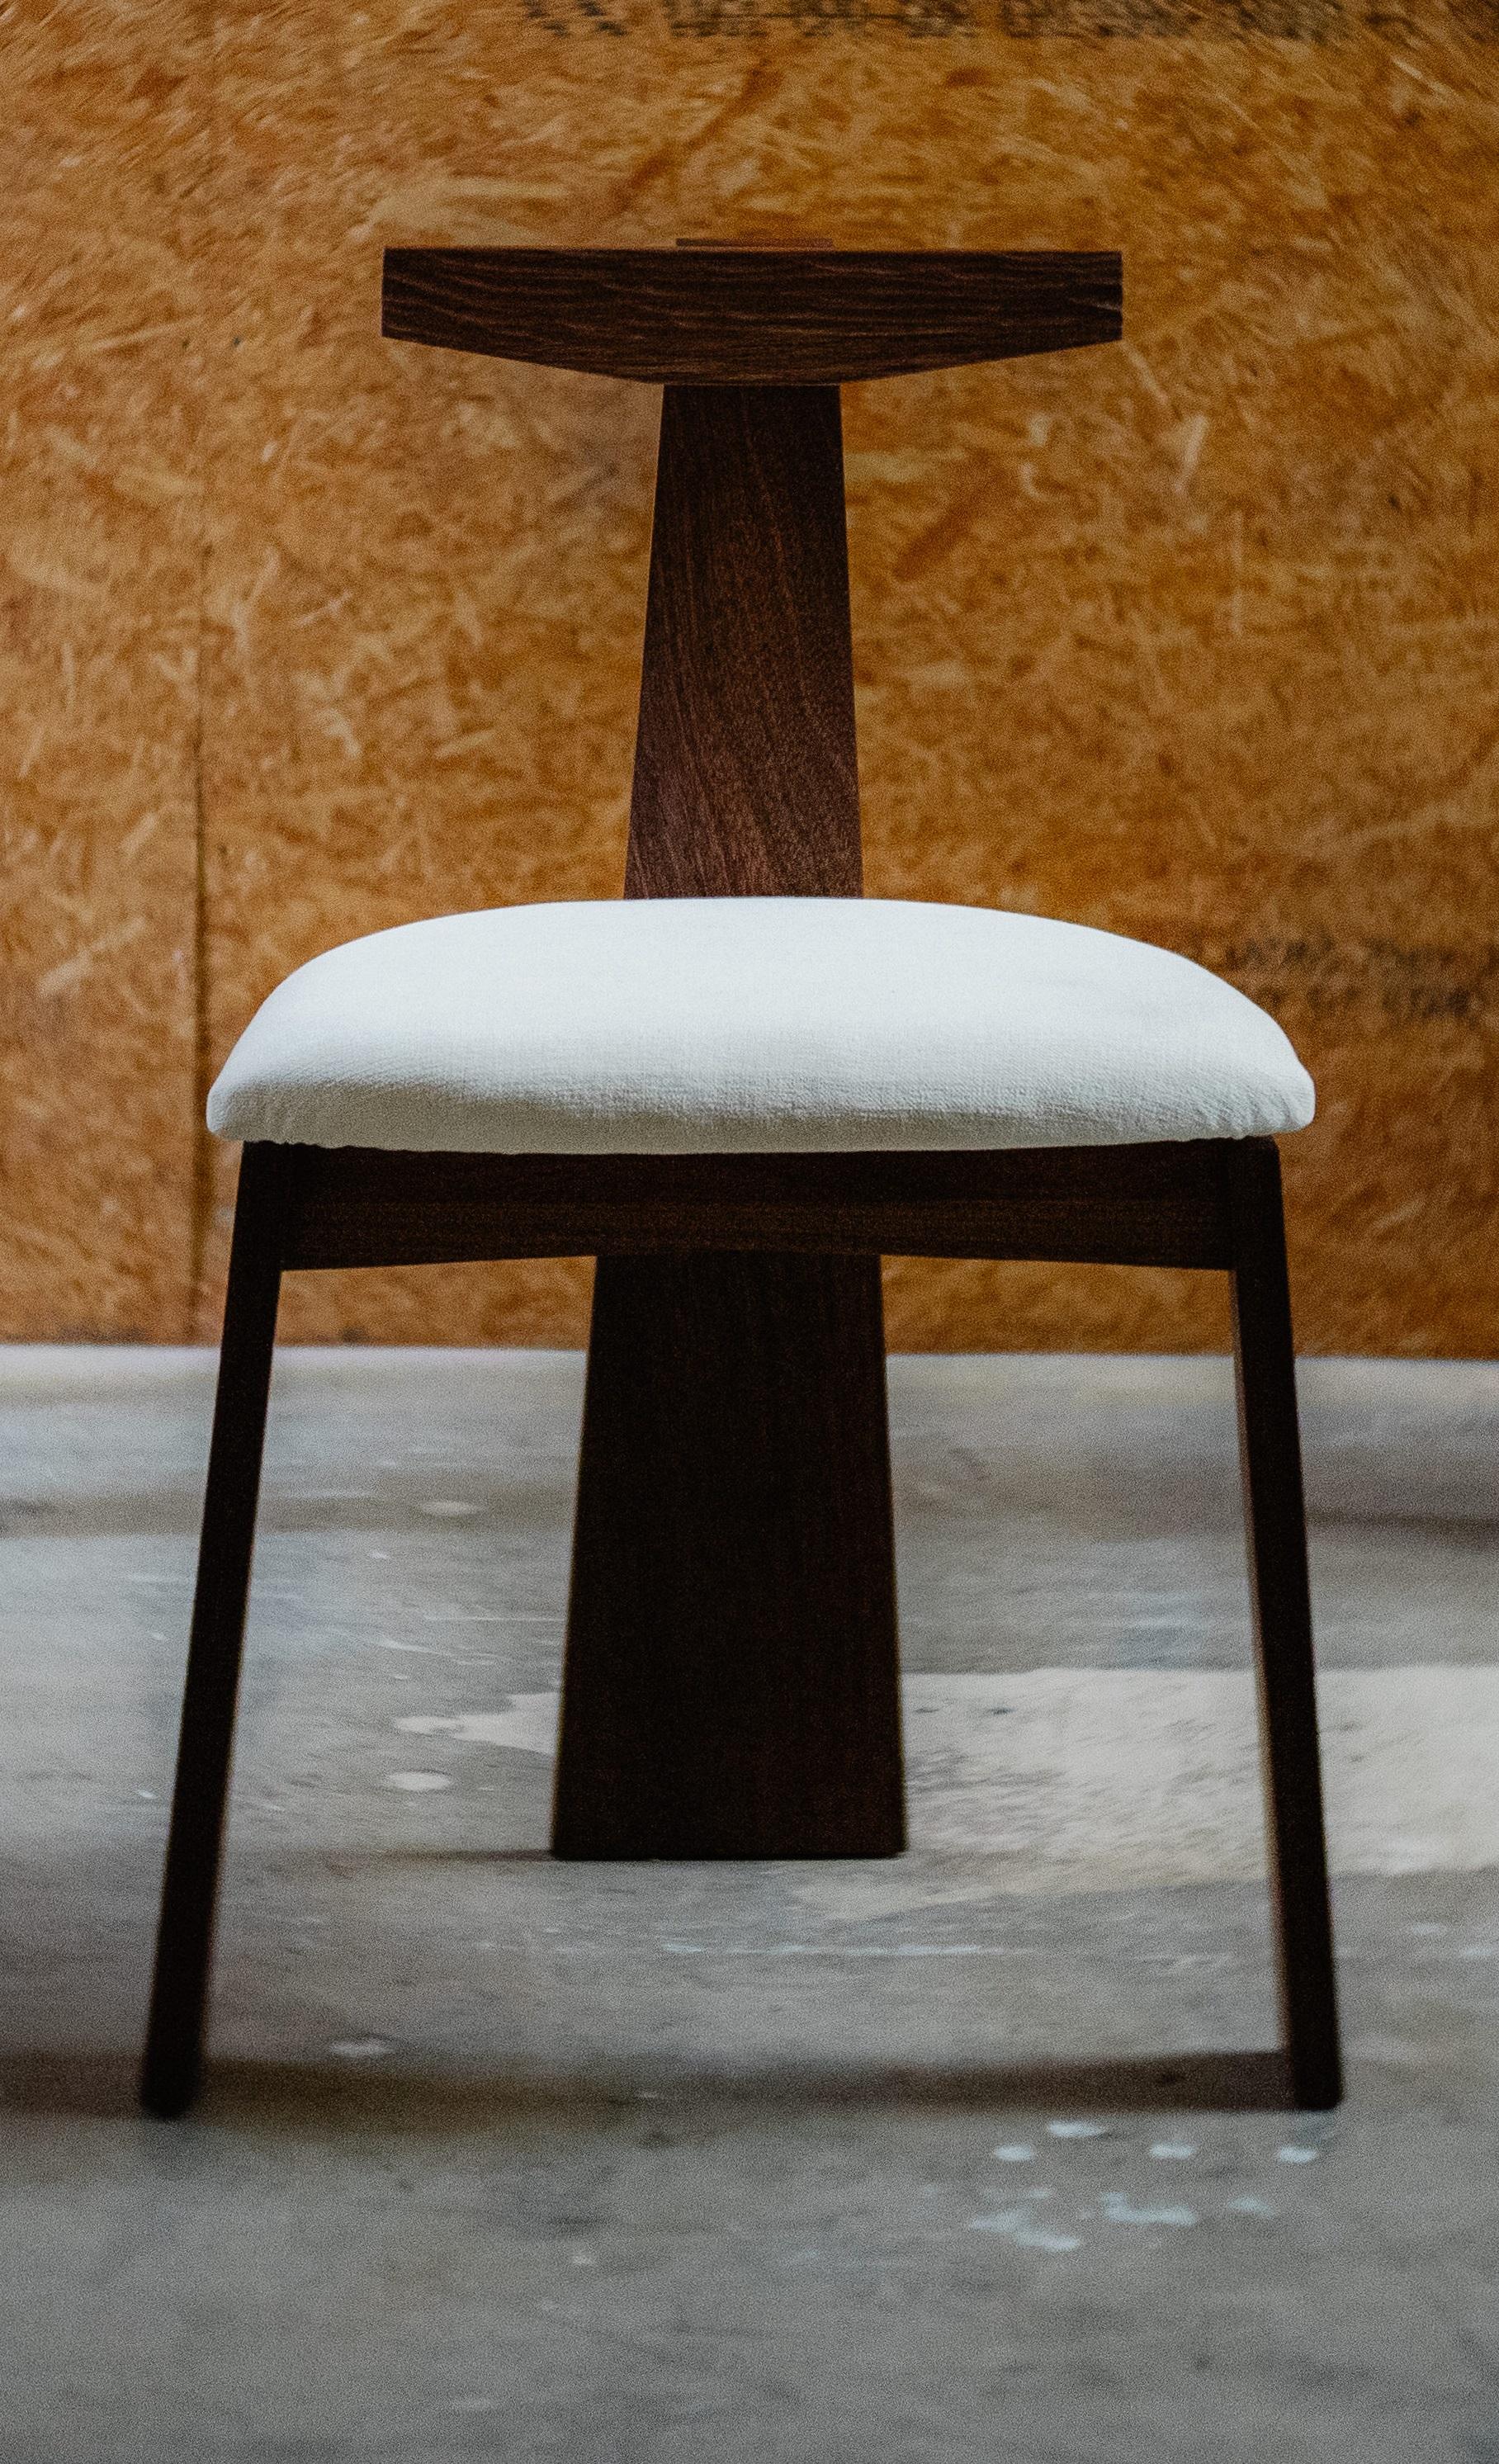 Urithi dining chair by Albert Potgieter Designs
Dimensions: D 45 x W 45 x H 80 cm. SH: 45 cm.
Materials: Mahogany.

The Urithi - meaning Heritage. This Dining Chair was designed to capture the heritage of Albert Potgieter within a chair.